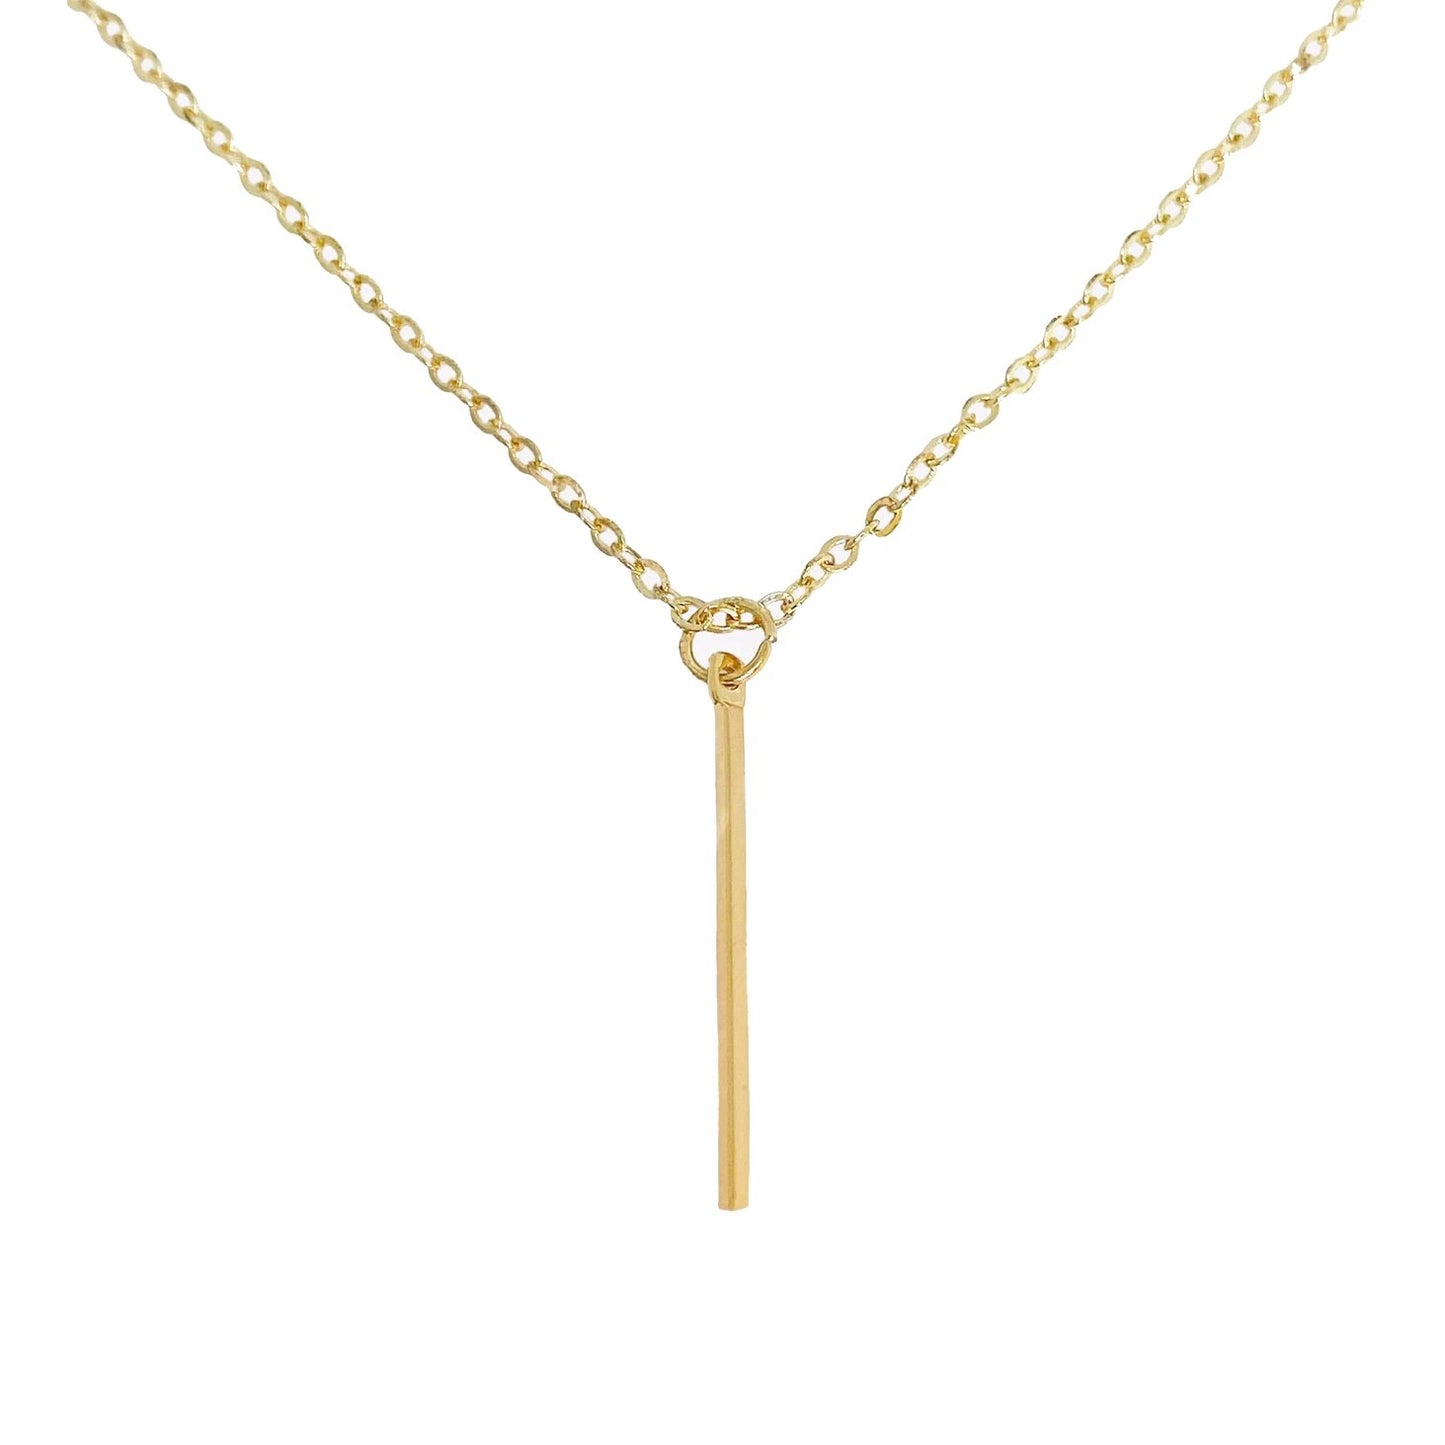 Gold-Plated Vertical Bar Minimalist Pendant Necklace